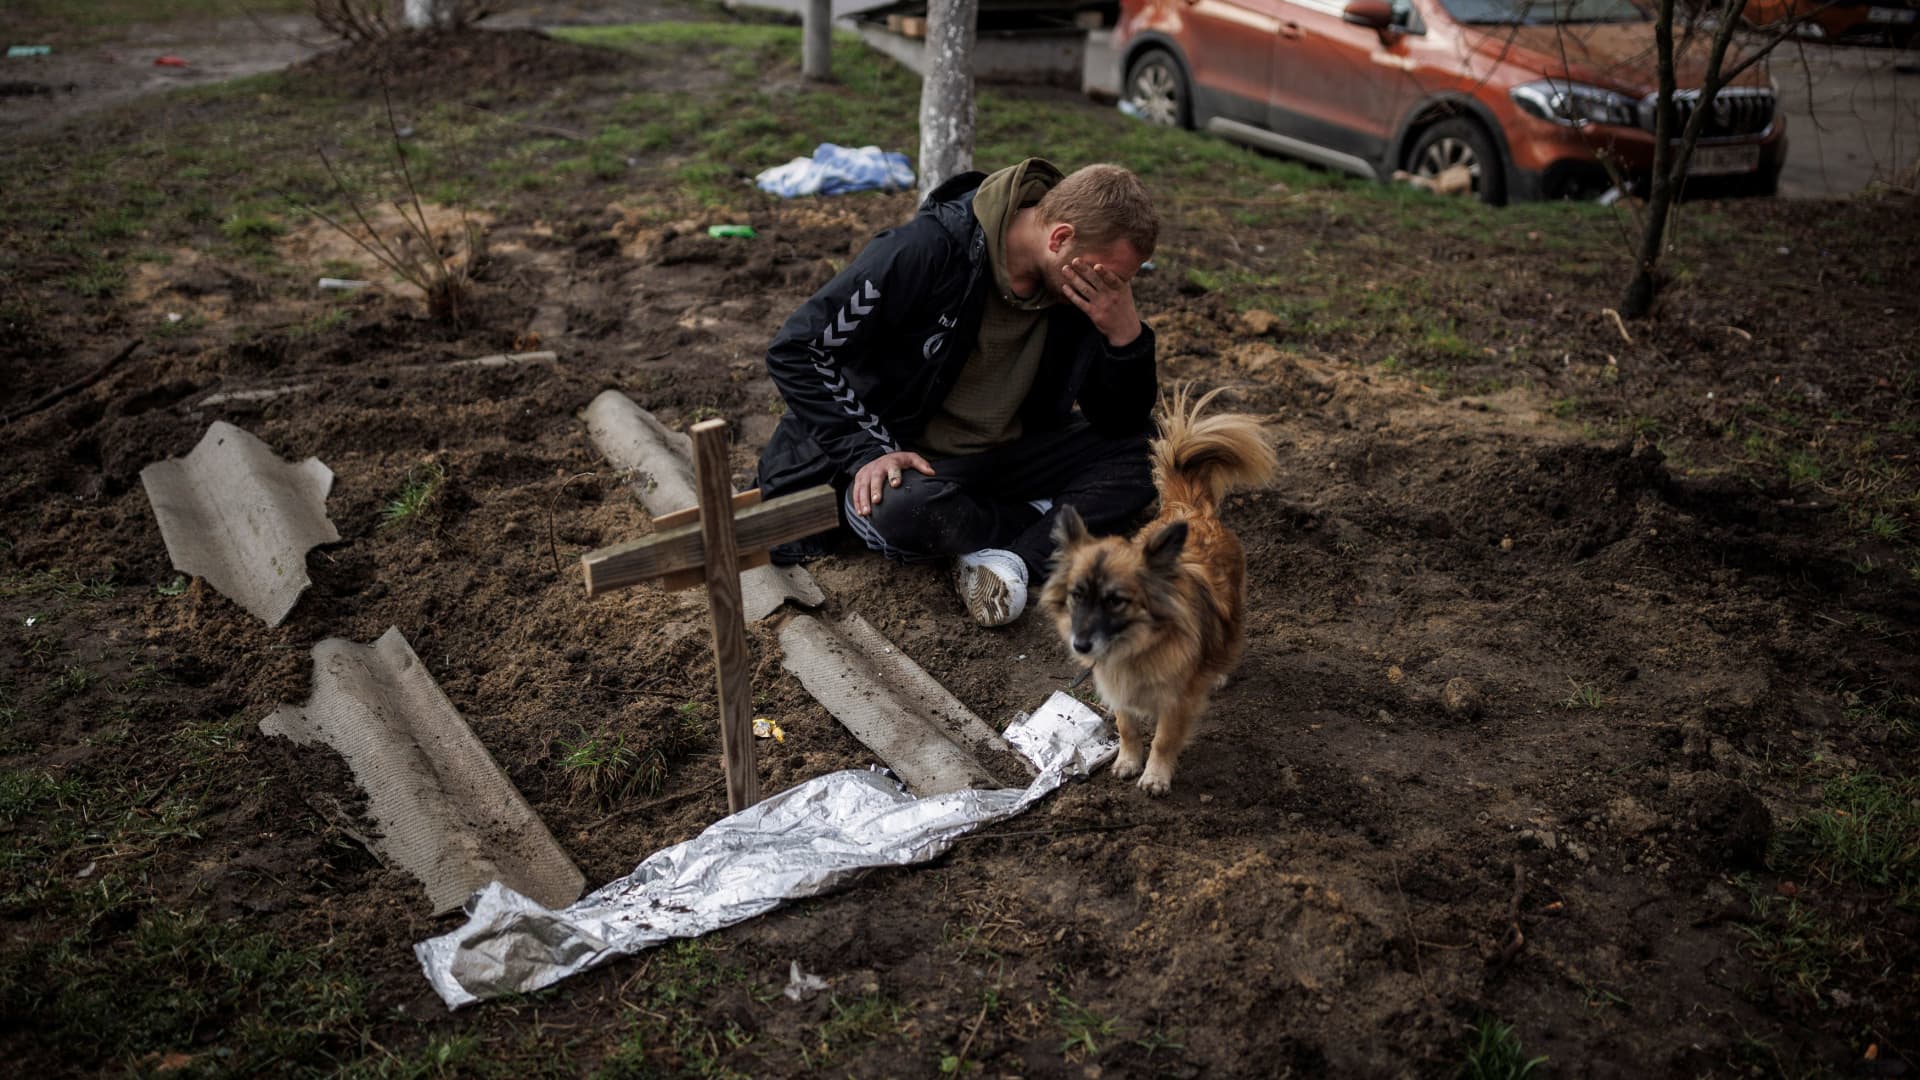 Serhii Lahovskyi, 26, mourns next to the grave of his friend Ihor Lytvynenko, who according to residents was killed by Russian soldiers, after they found him beside a building's basement, amid Russia's invasion of Ukraine, in Bucha, in Kyiv region, Ukraine, April 6, 2022. 